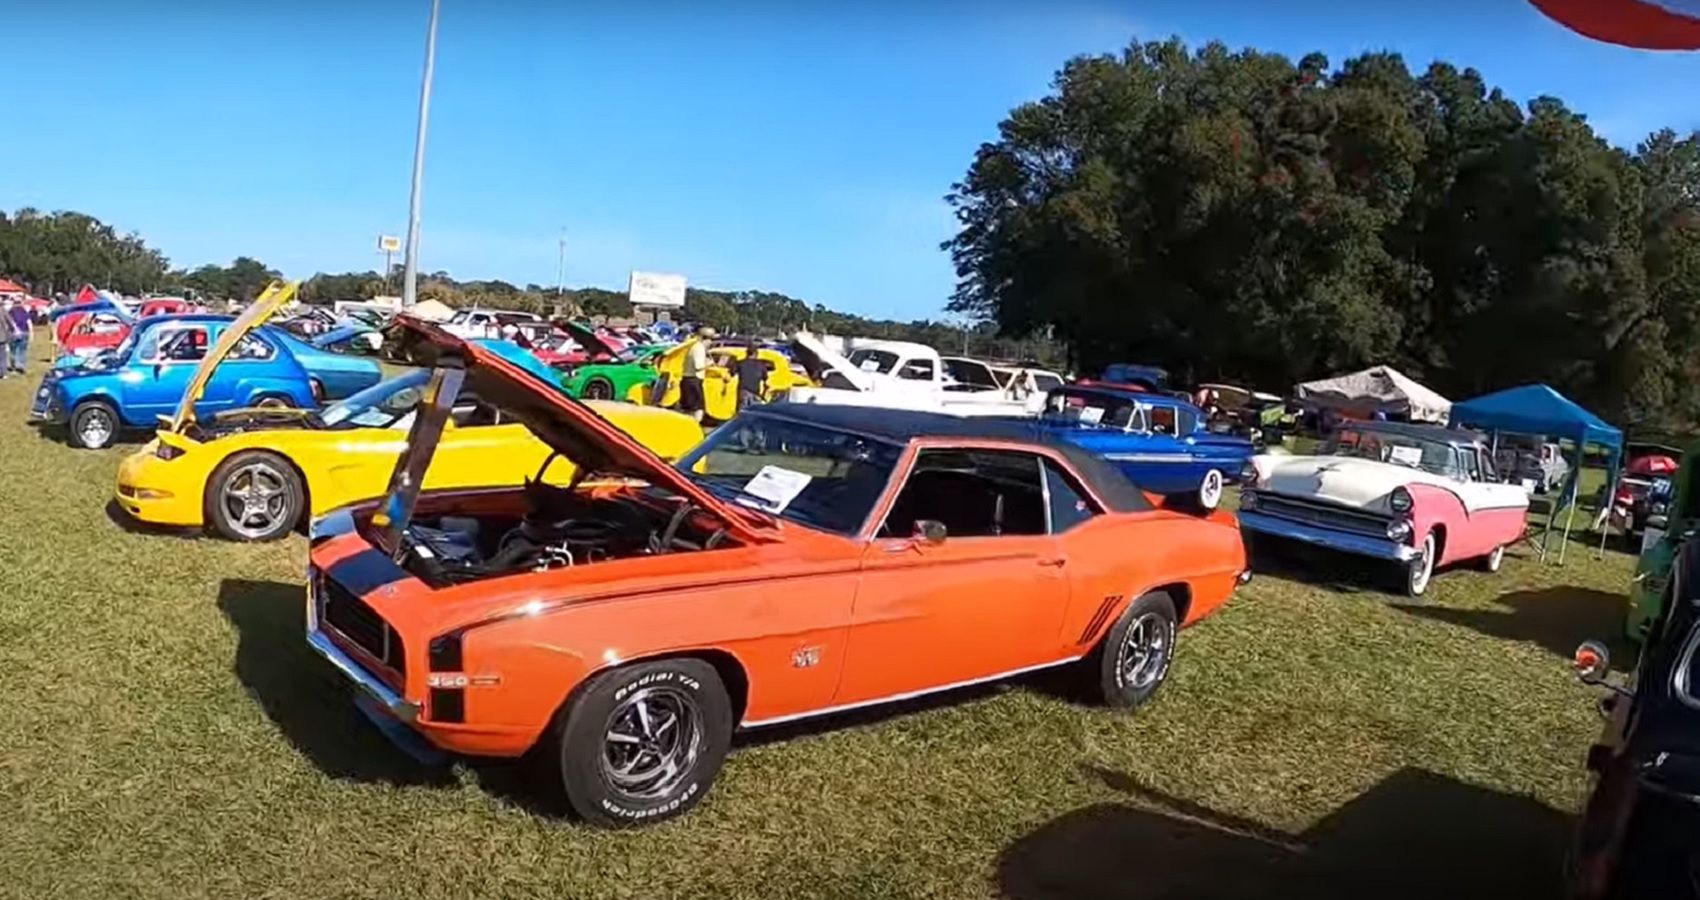 Feast Your Eyes On Some Rare Muscle Cars At Don Garlits' Xmas Car Show